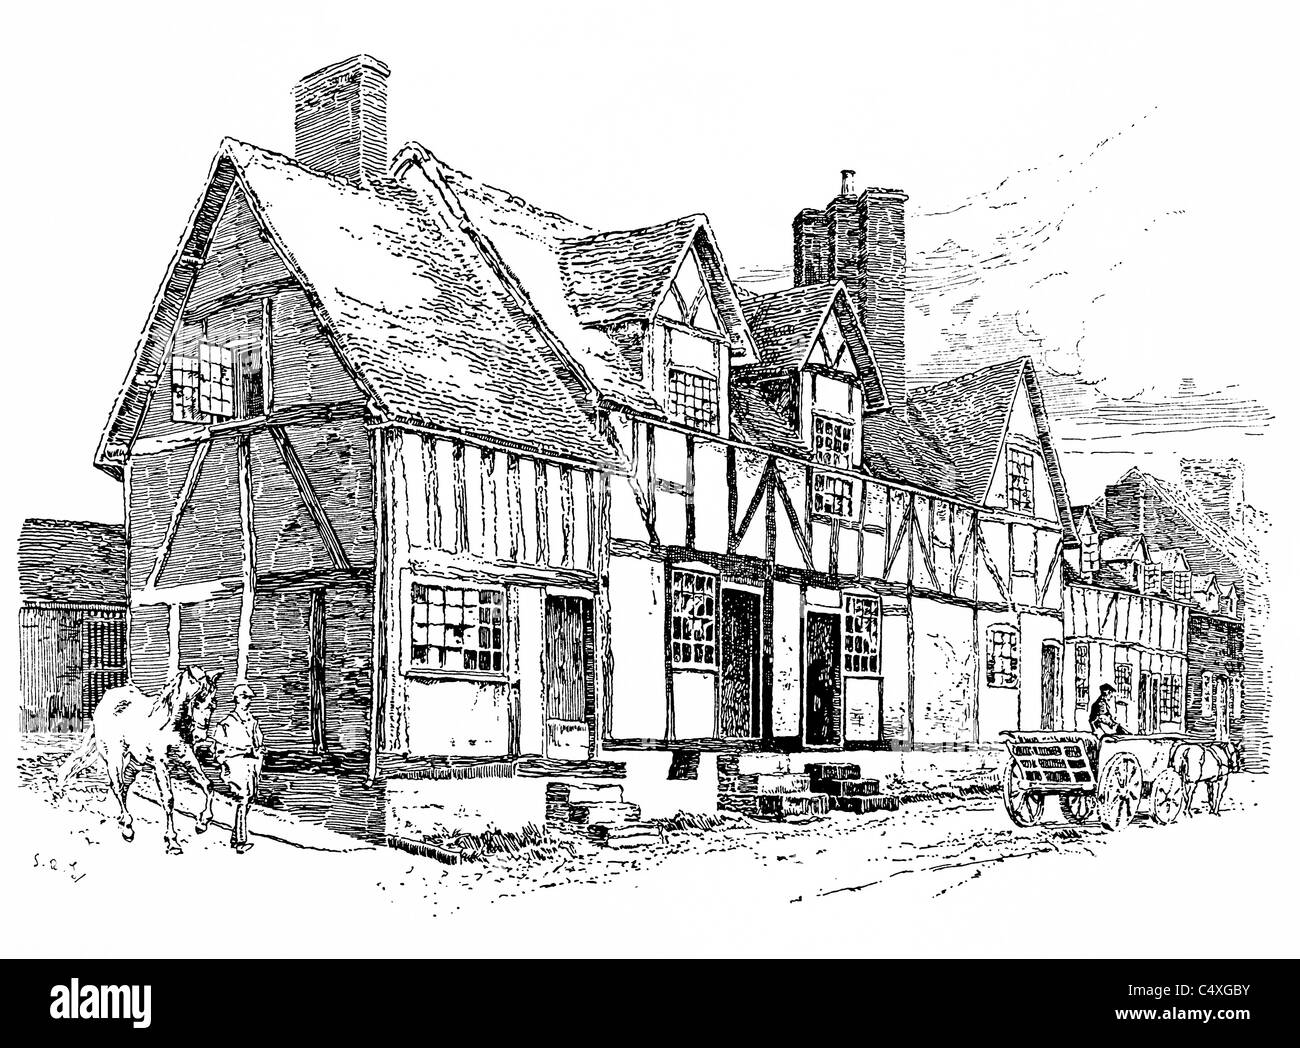 Chaddesley Corbett, Worcestershire - pen and ink illustration from 'Old English Country Cottages' by Charles Holme, 1906. Stock Photo